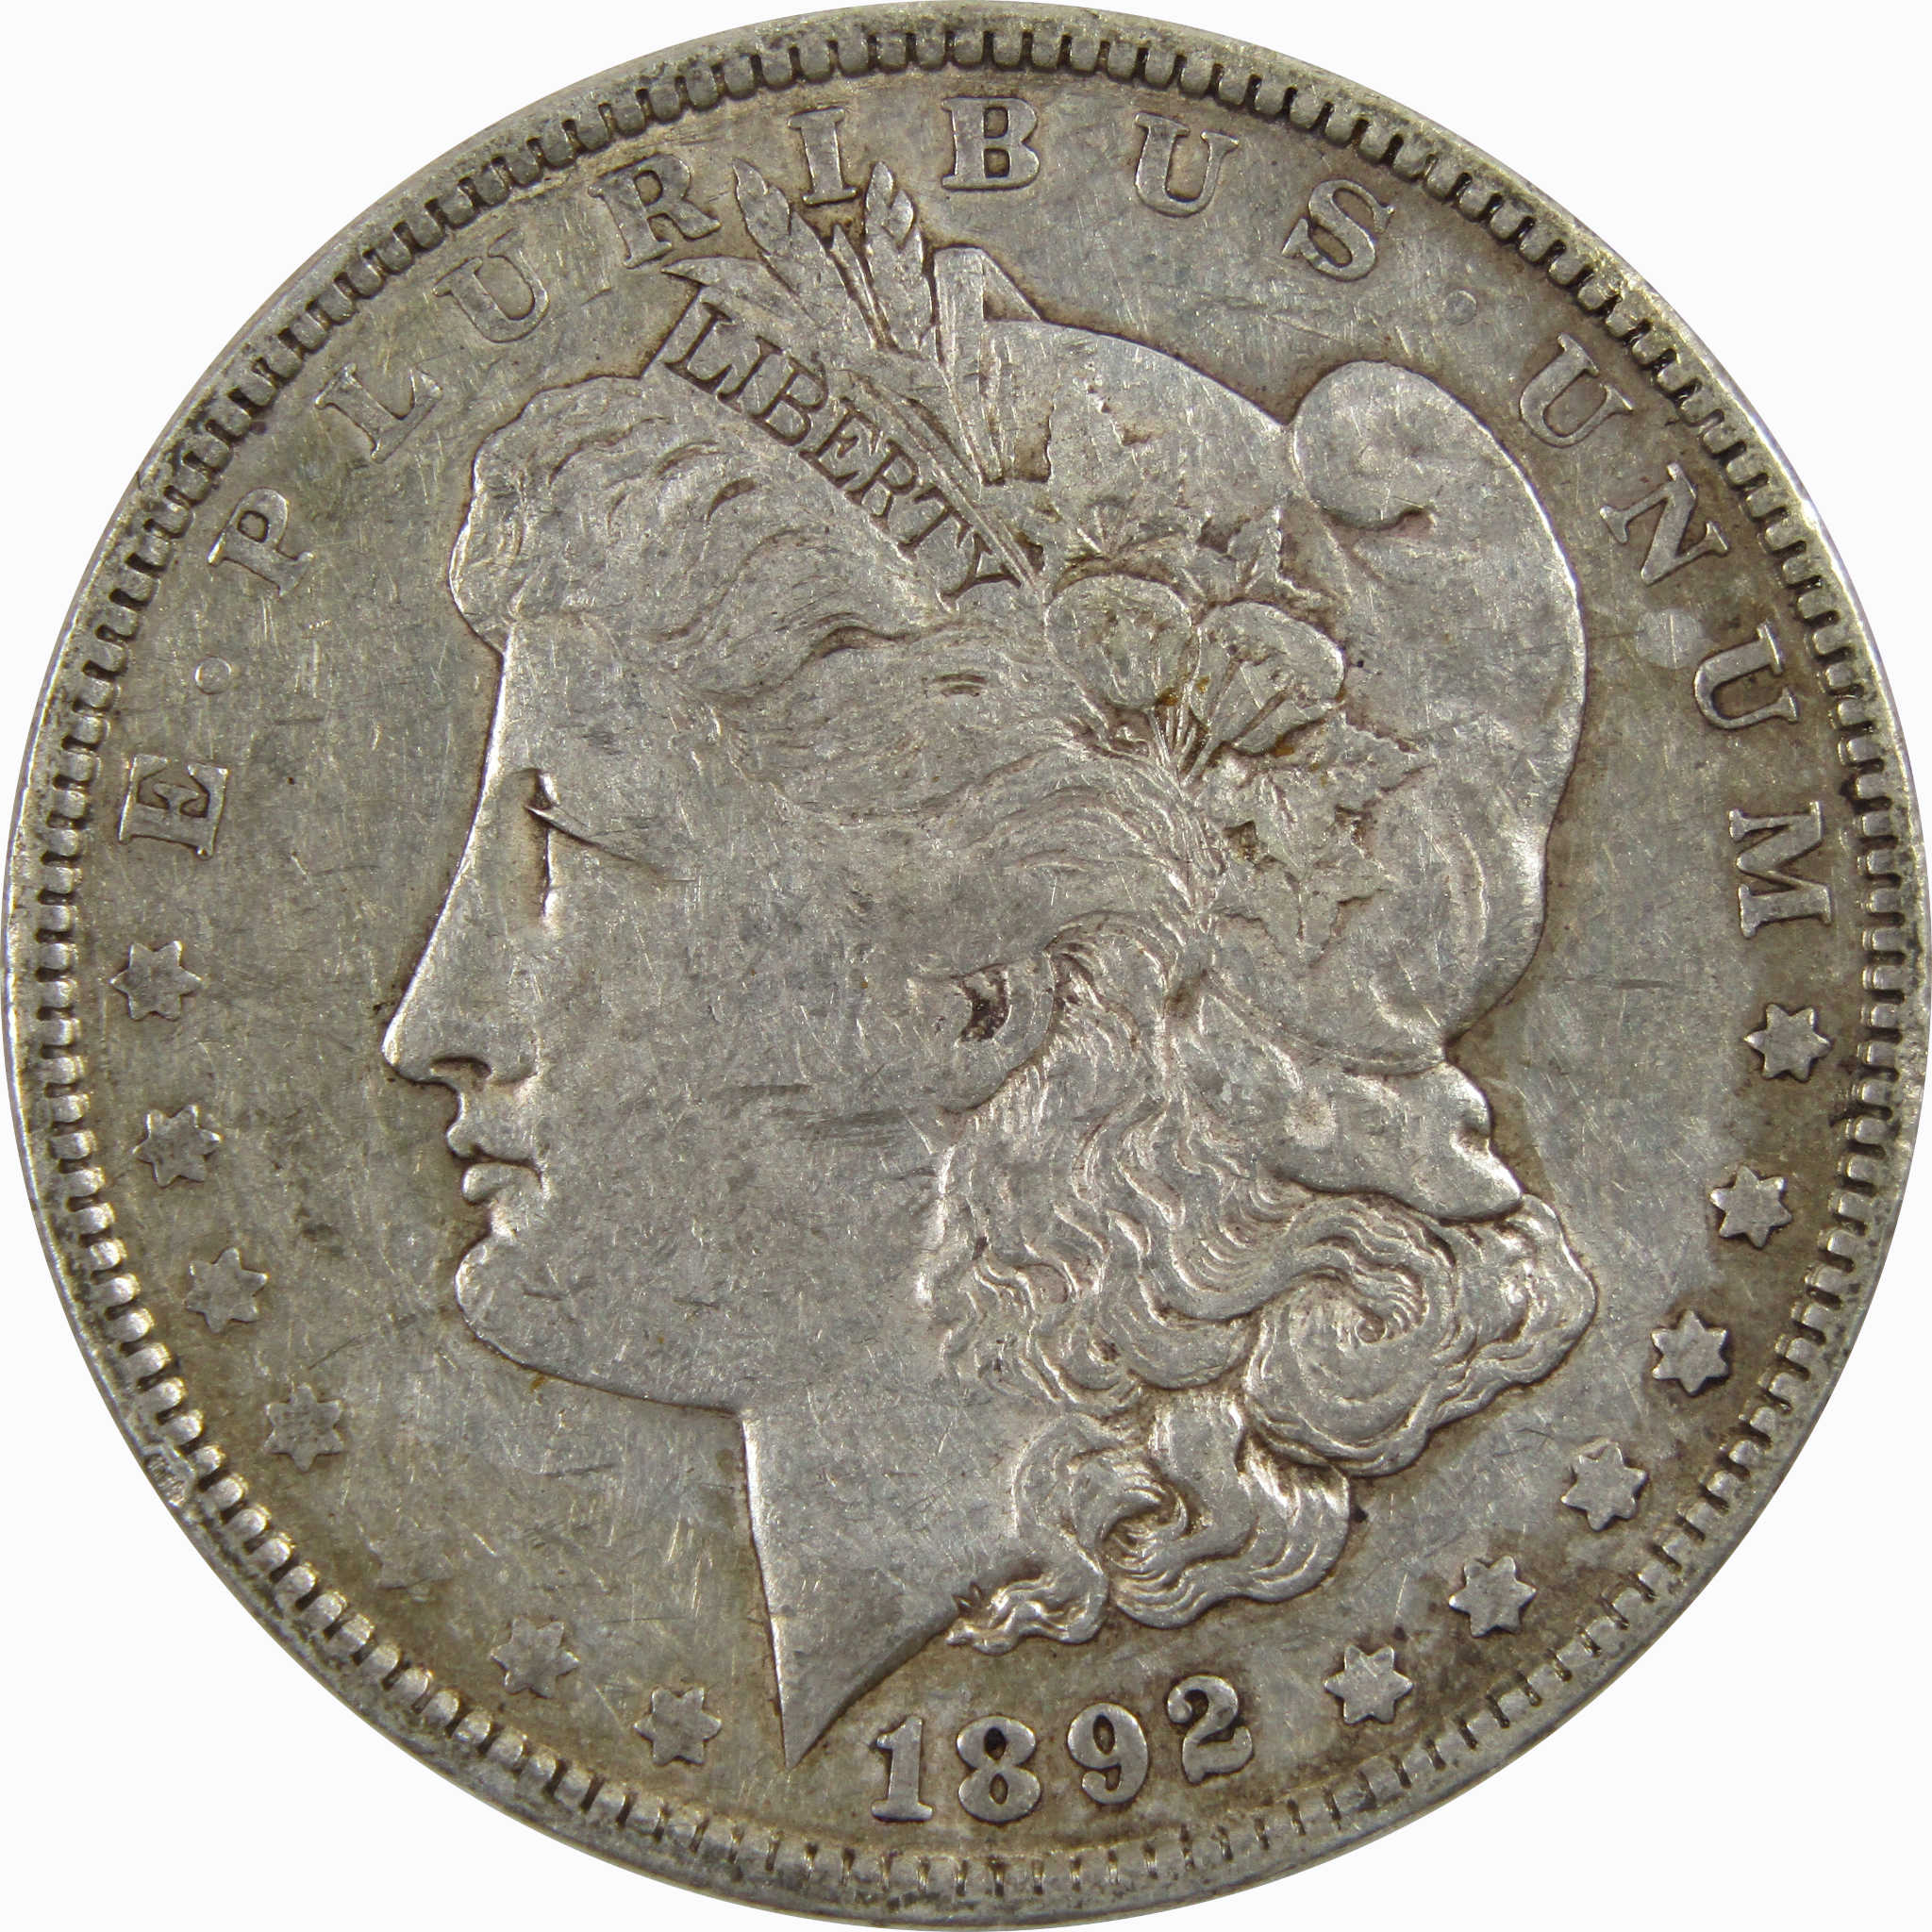 1892 Morgan Dollar XF EF Extremely Fine 90% Silver $1 Coin SKU:I3970 - Morgan coin - Morgan silver dollar - Morgan silver dollar for sale - Profile Coins &amp; Collectibles